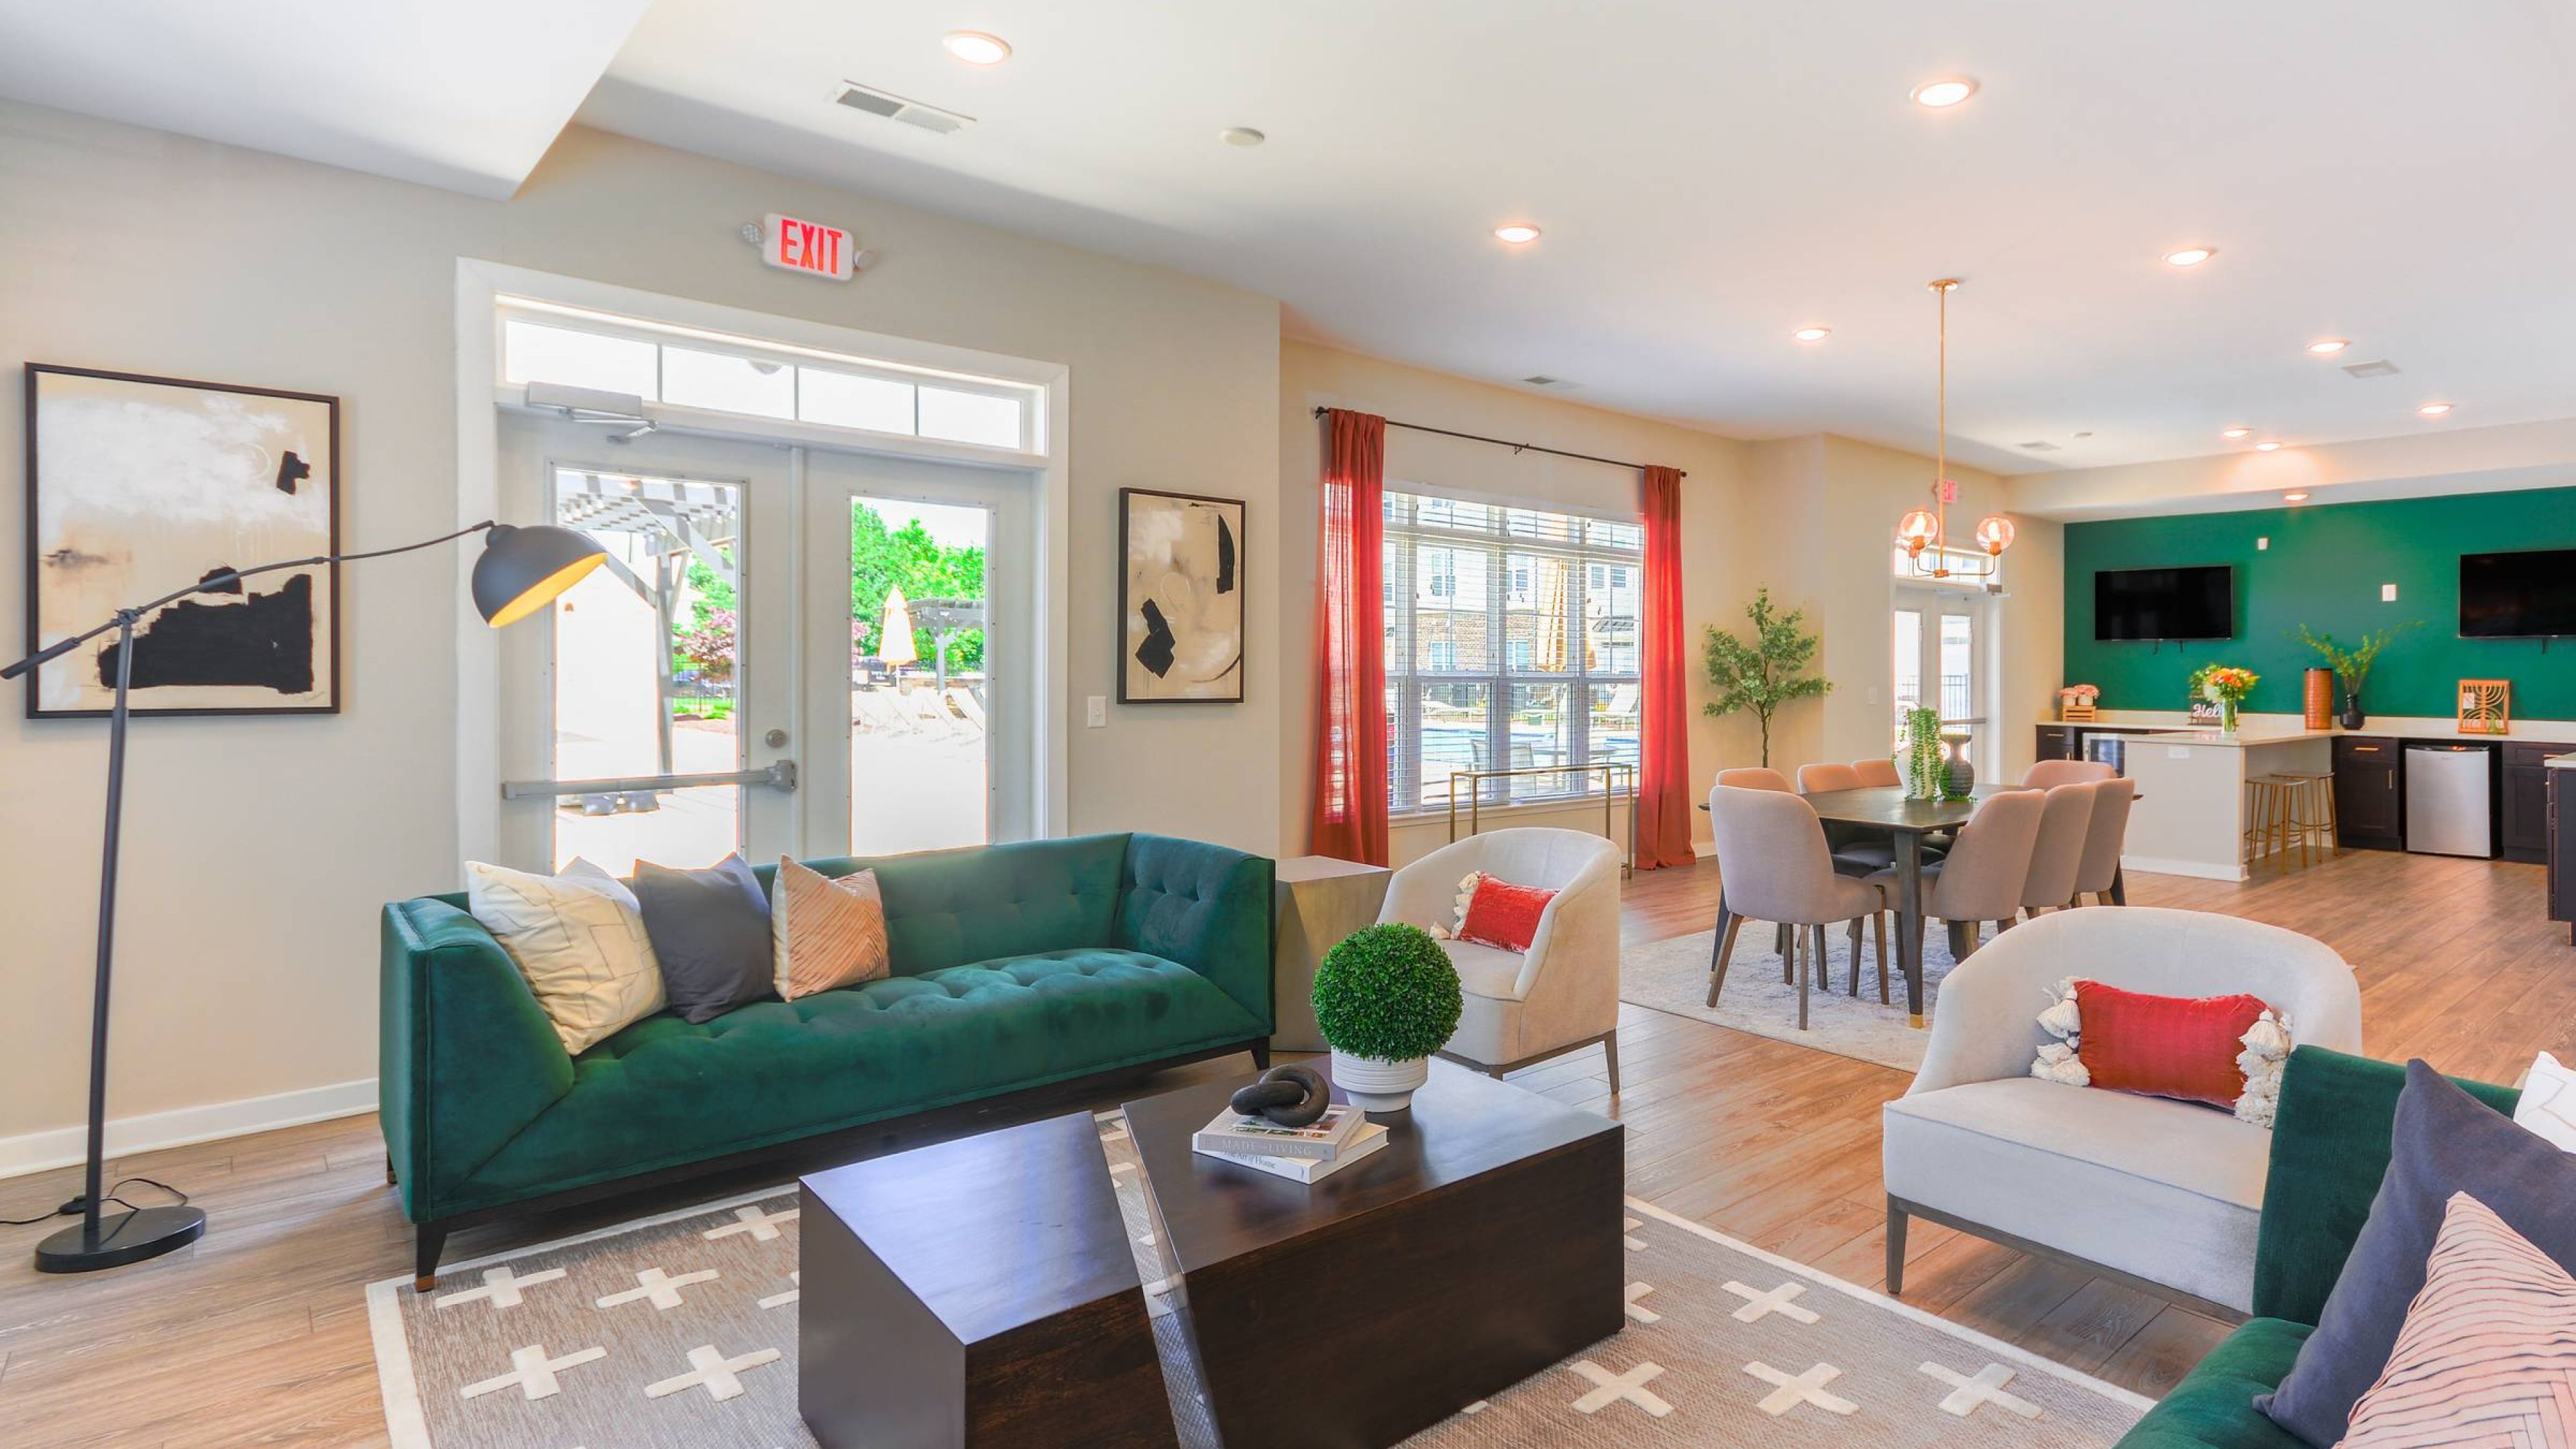 Hawthorne at St. Marks modern and vibrant resident clubroom, featuring a green velvet sofa and stylish decor.